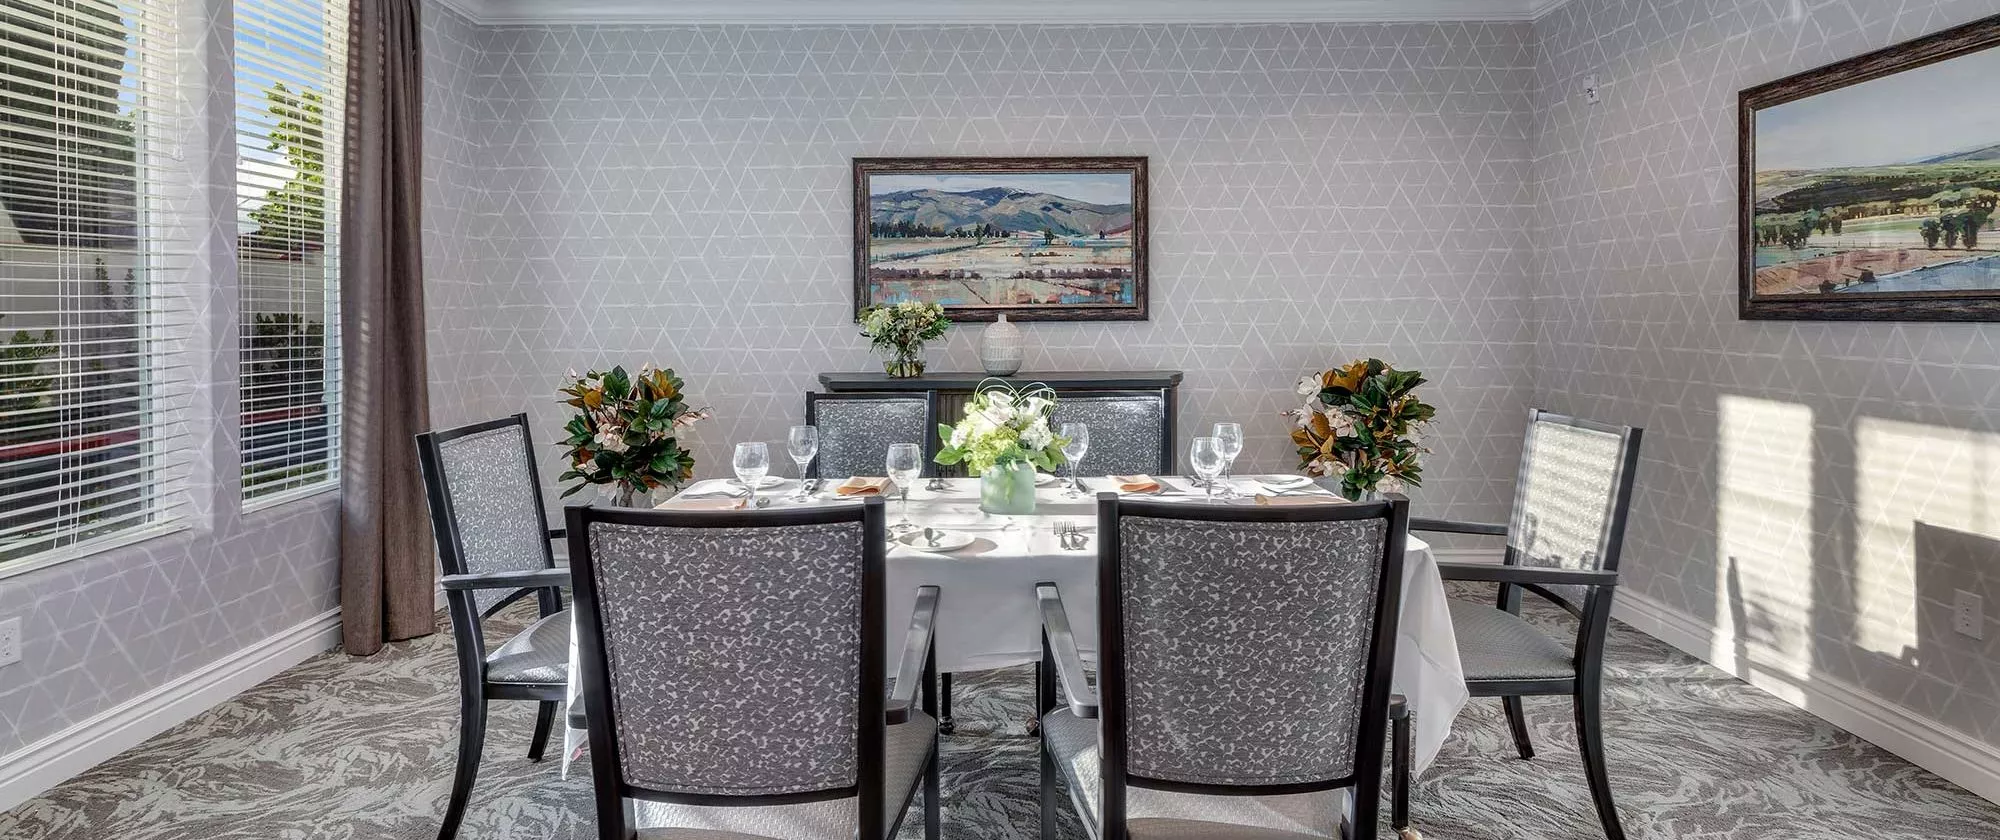 Silver Creek Private dining room